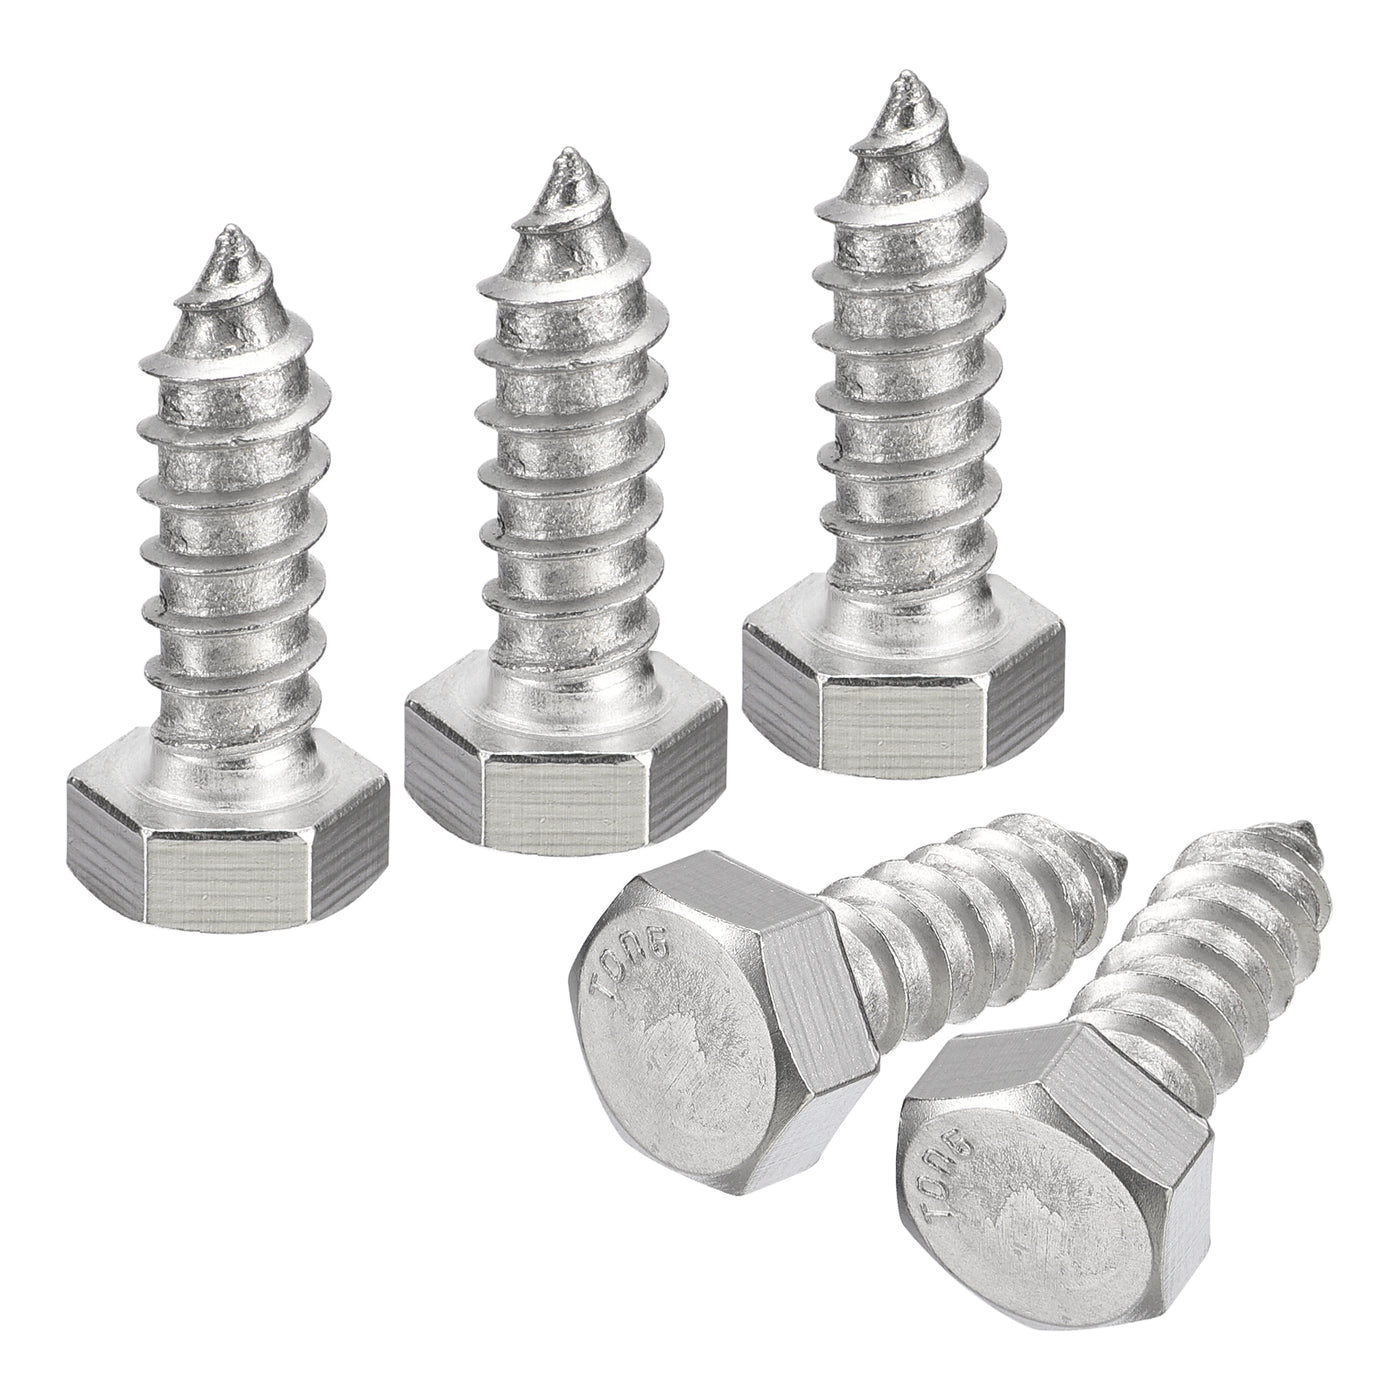 uxcell Uxcell Hex Head Lag Screws Bolts, 5pcs 1/2" x 1-1/2" 304 Stainless Steel Wood Screws